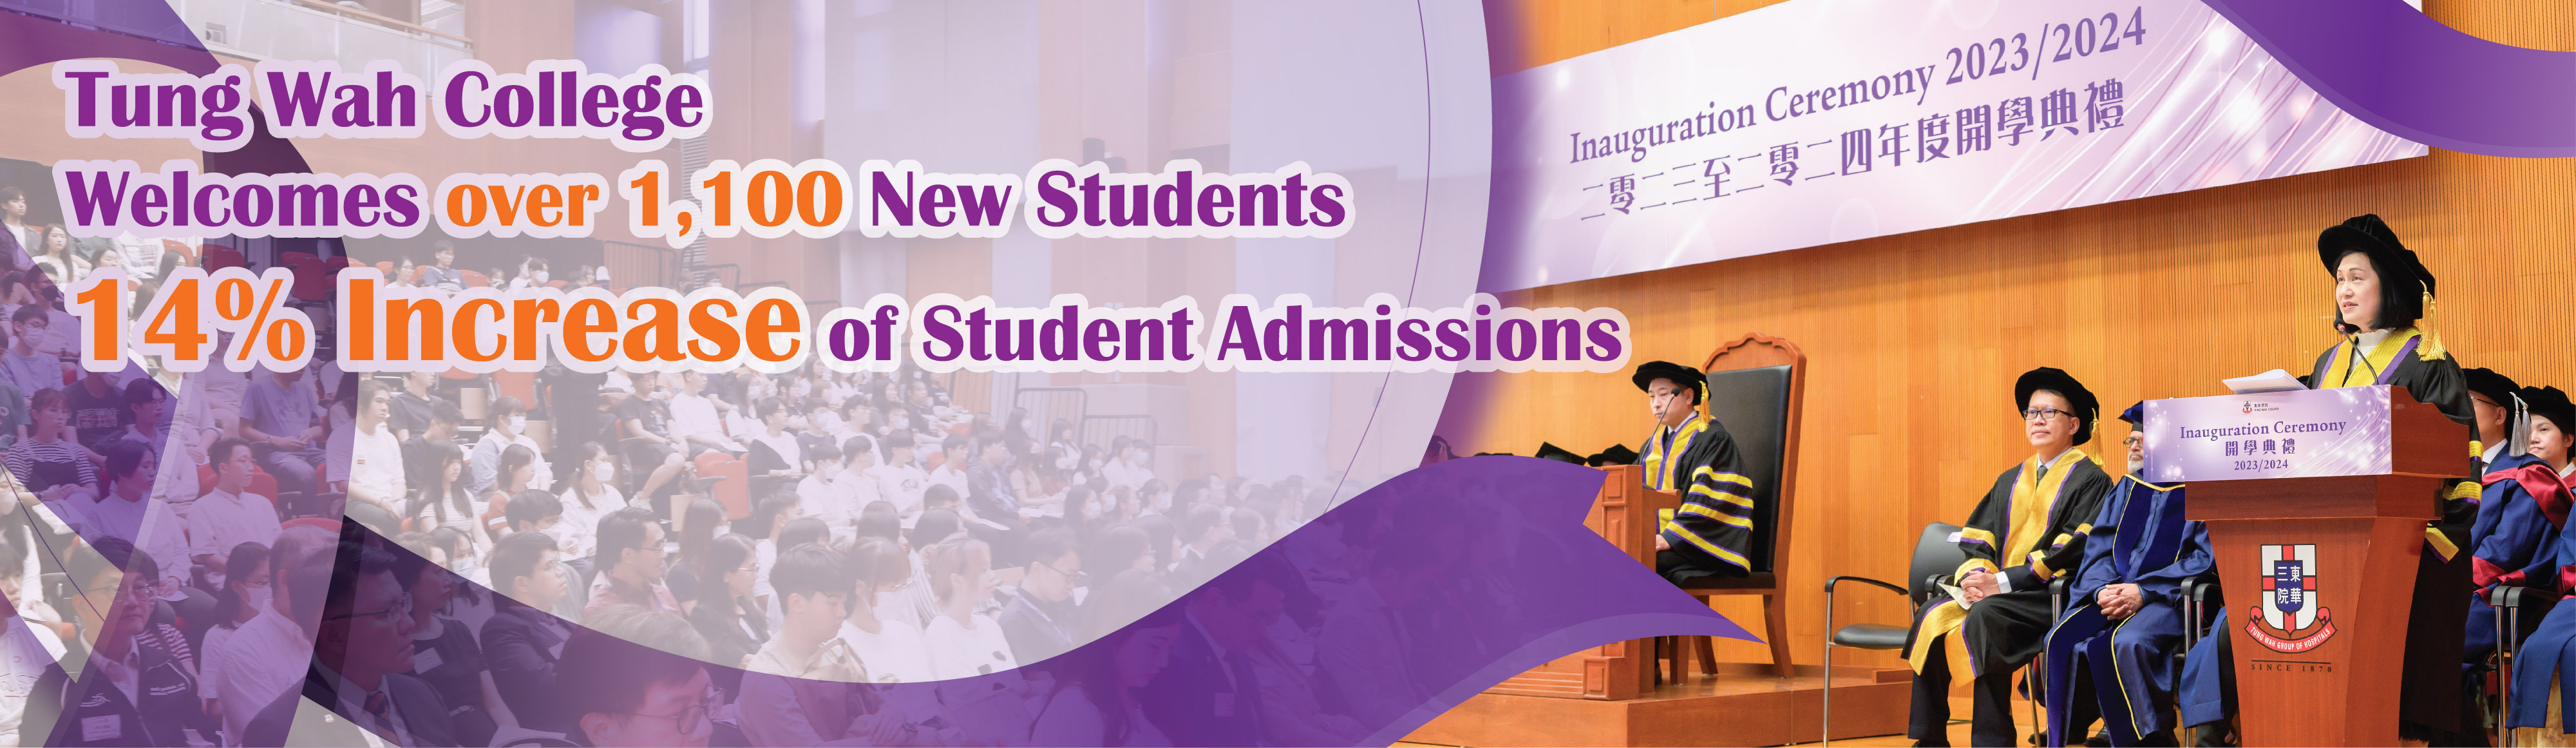 Tung Wah College Welcomes over 1,000 New Students, 14% Increase of Student Admissions